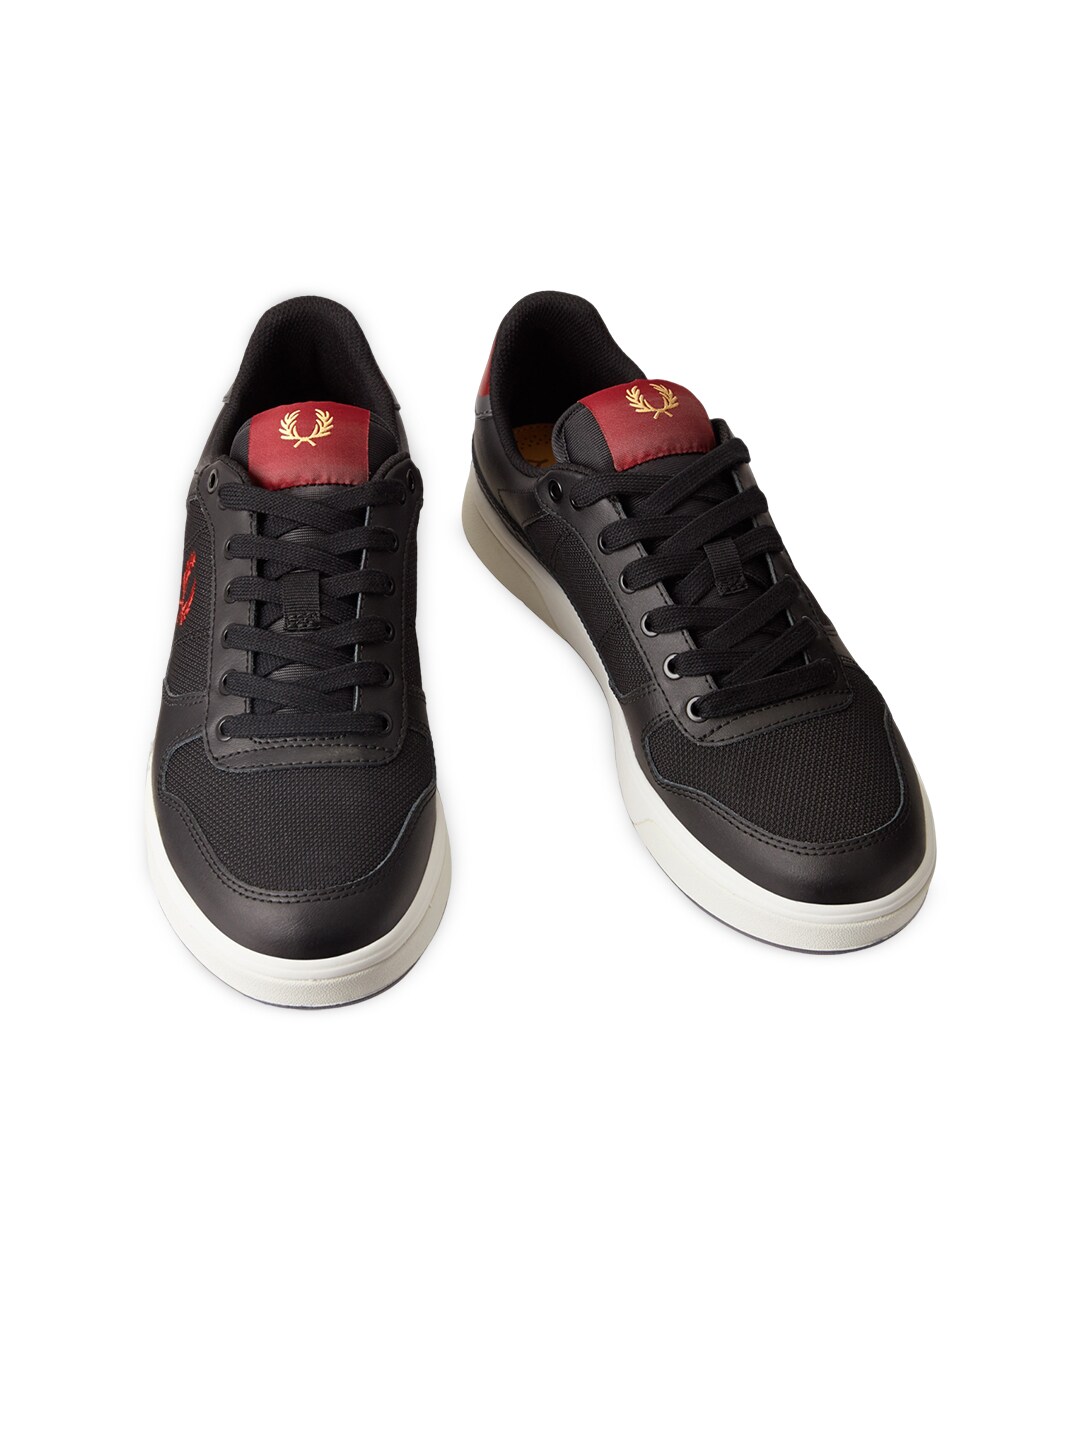 Fred Perry Women Canvas Lace-Up Sneakers Price in India